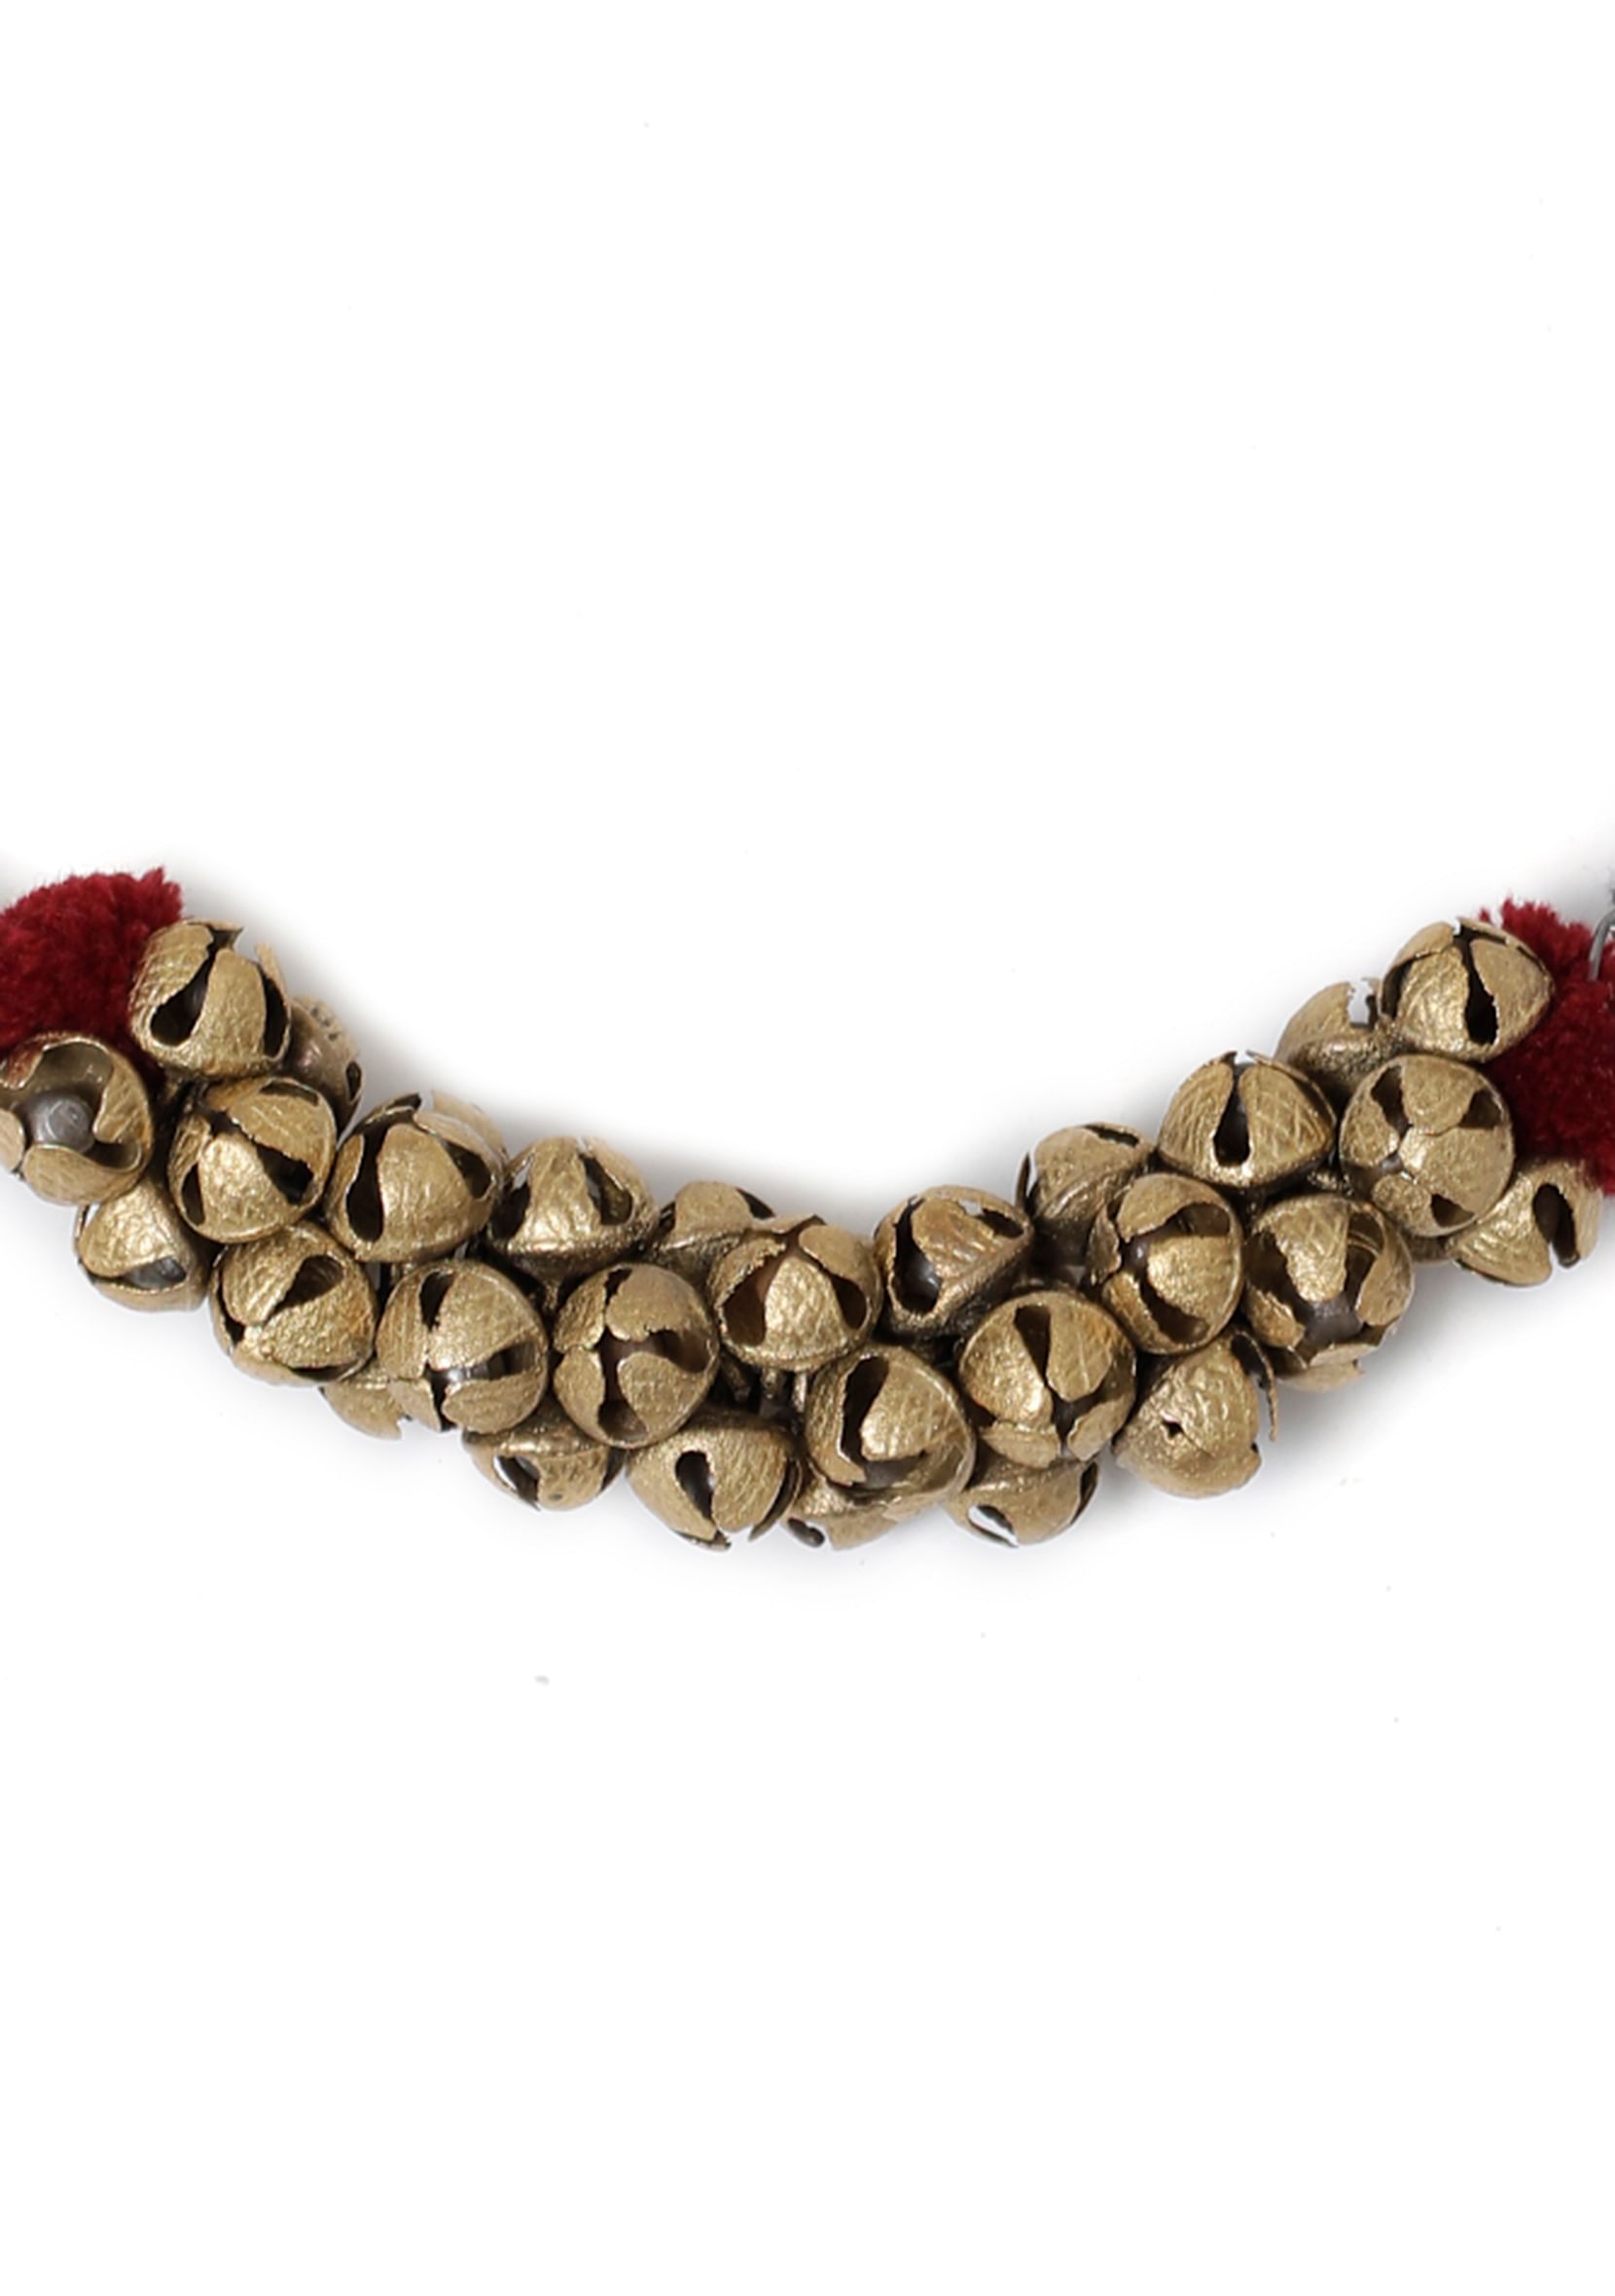 Ghungroo Tribal Necklace